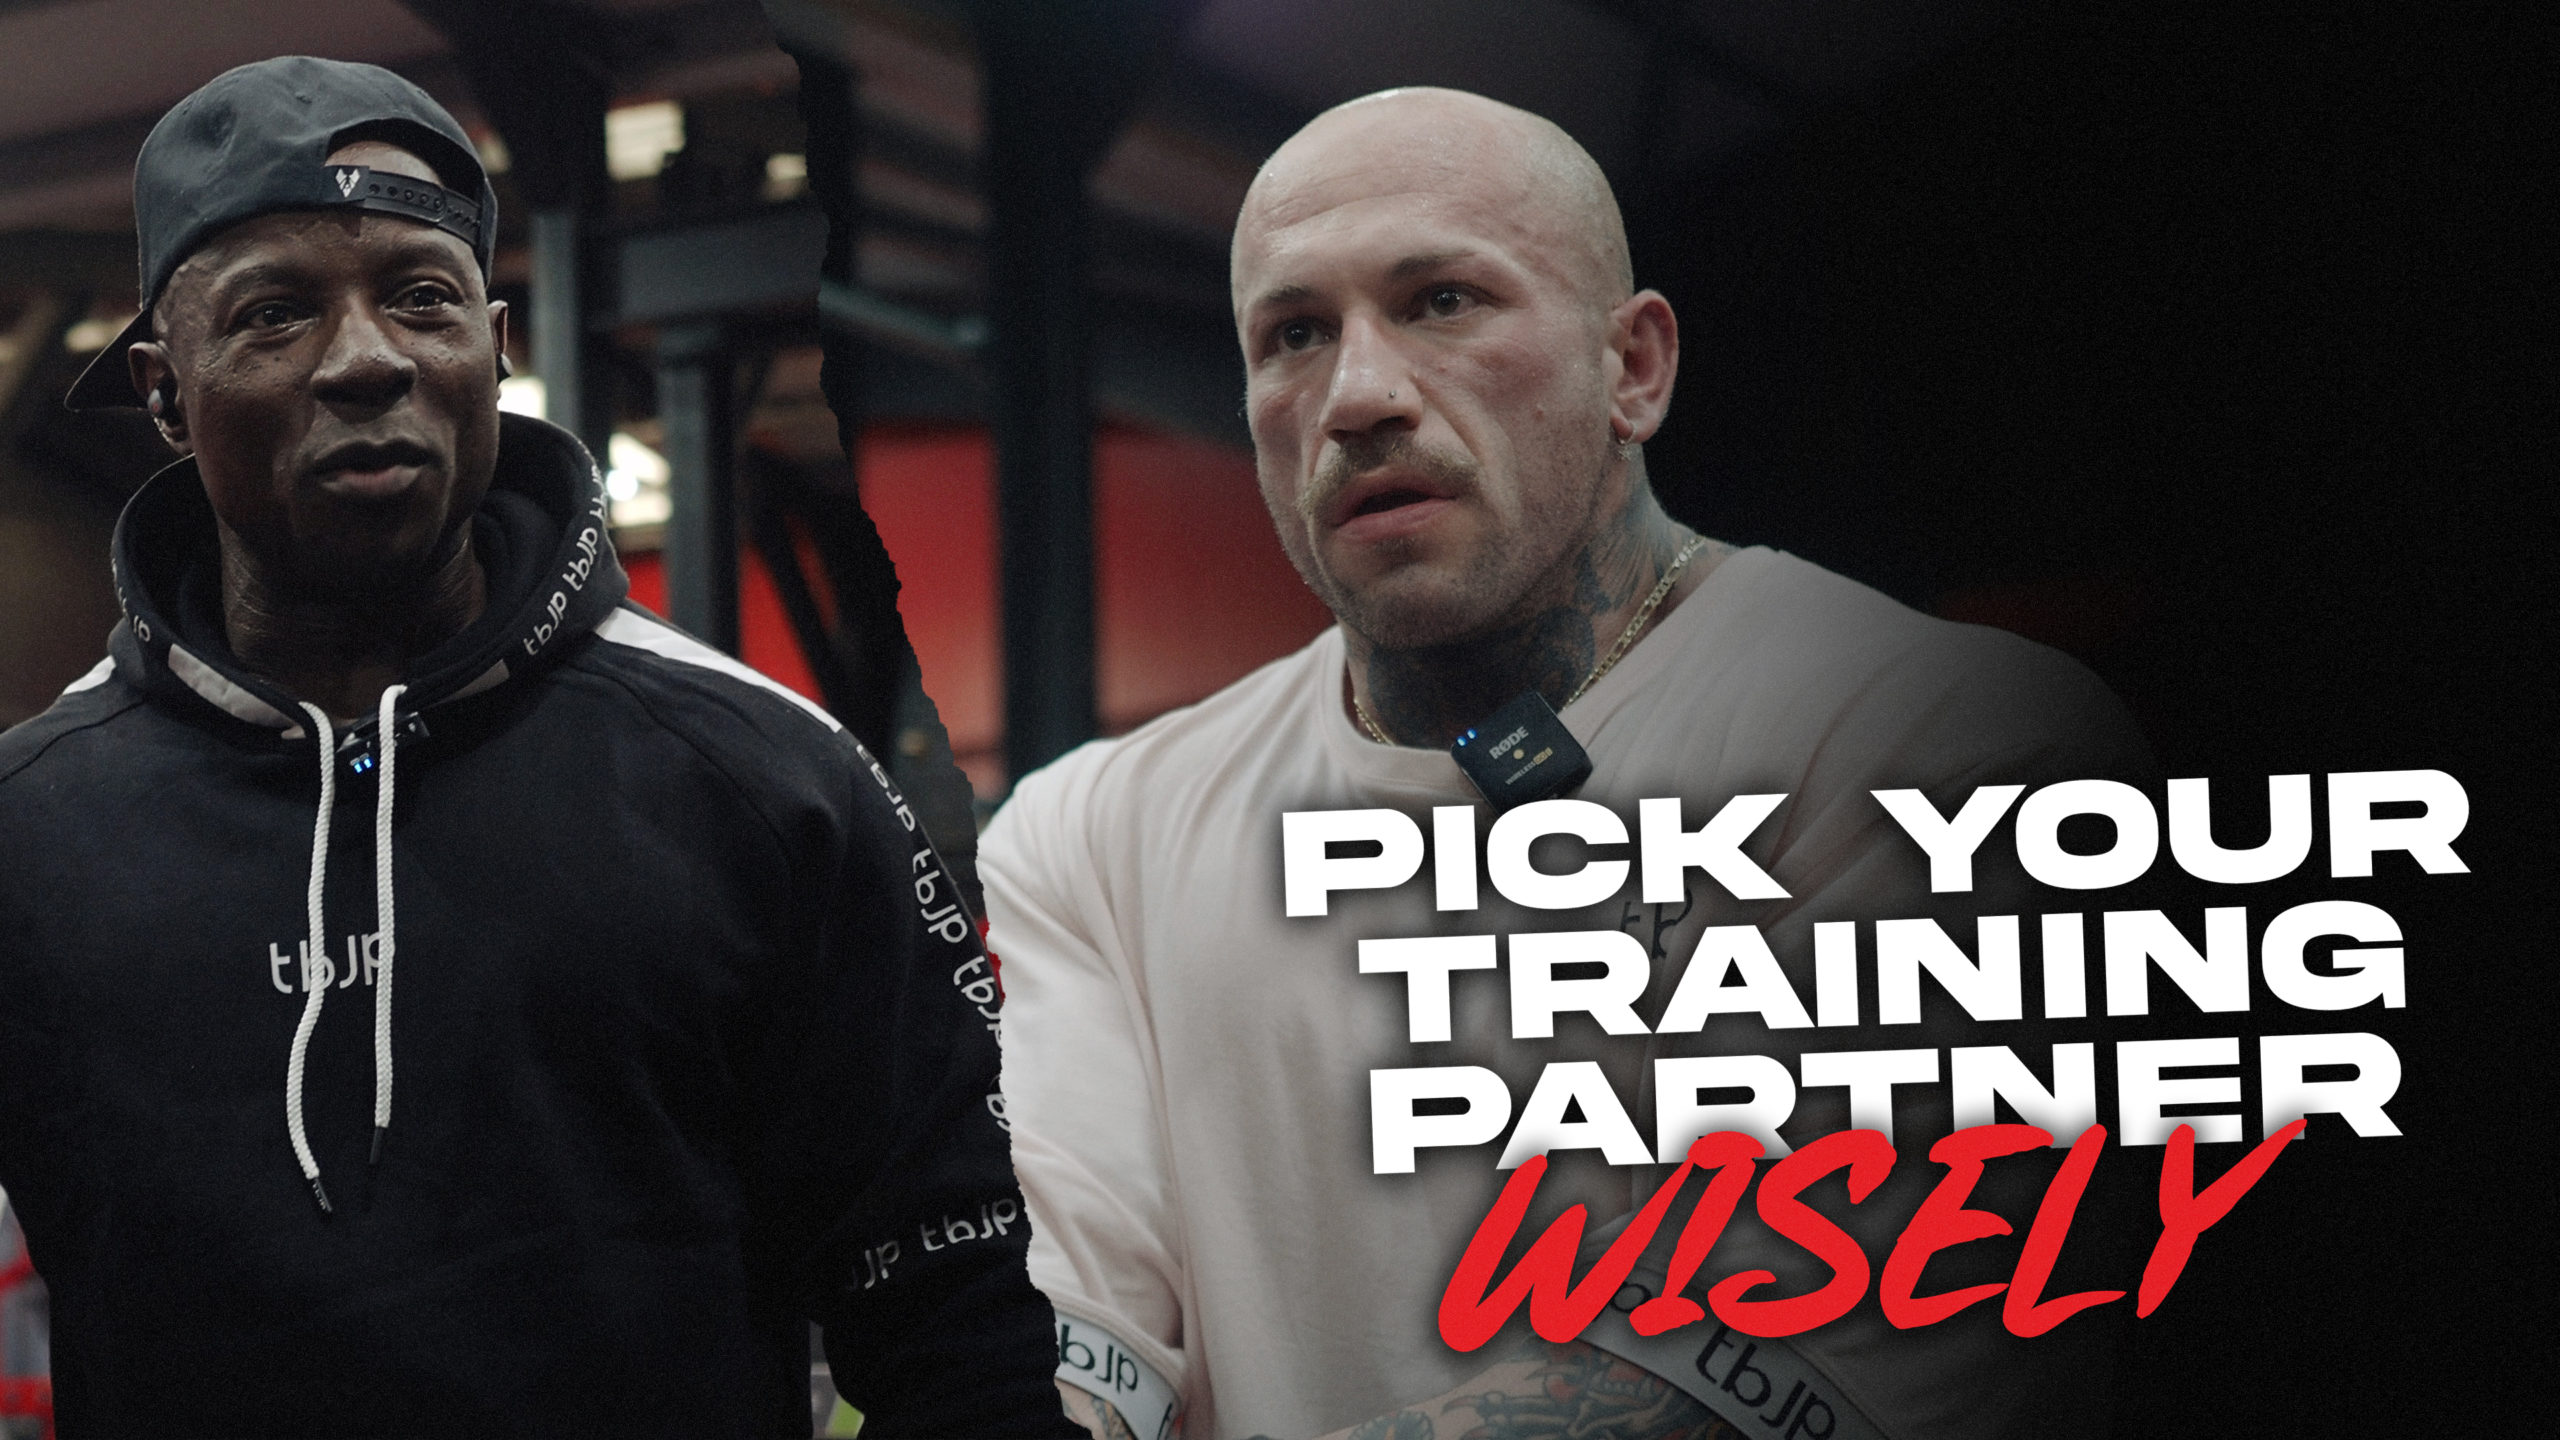 PICK YOUR TRAINING PARTNER WISELY